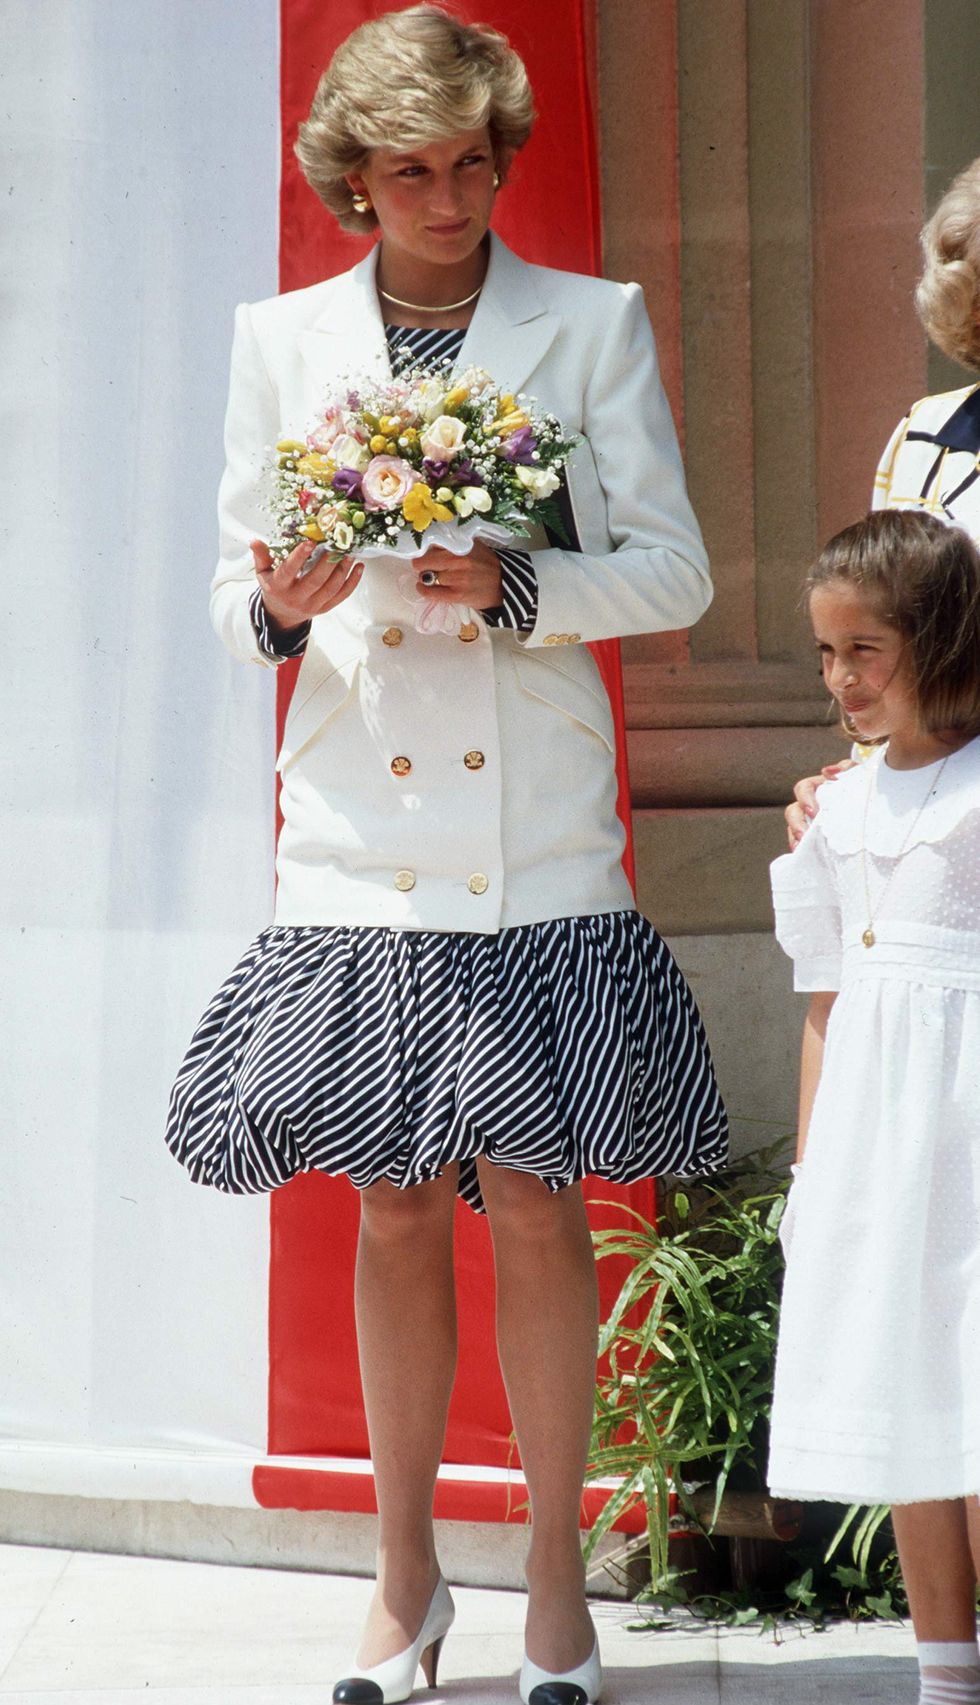 cannes, france may 15 princess diana in cannes wearing a puff ball skirt photo by tim graham photo library via getty images